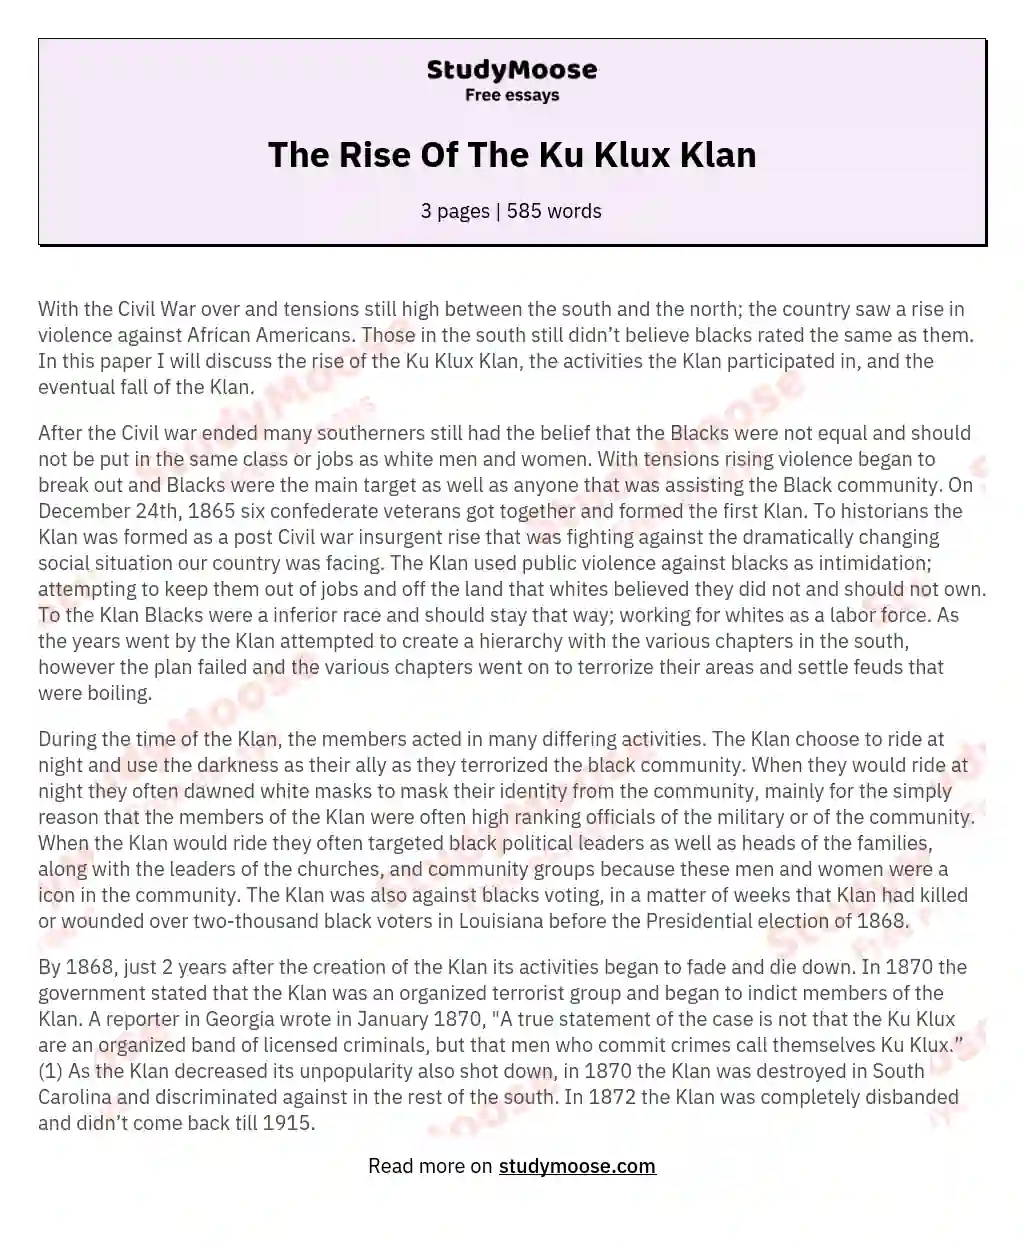 The Rise Of The Ku Klux Klan essay